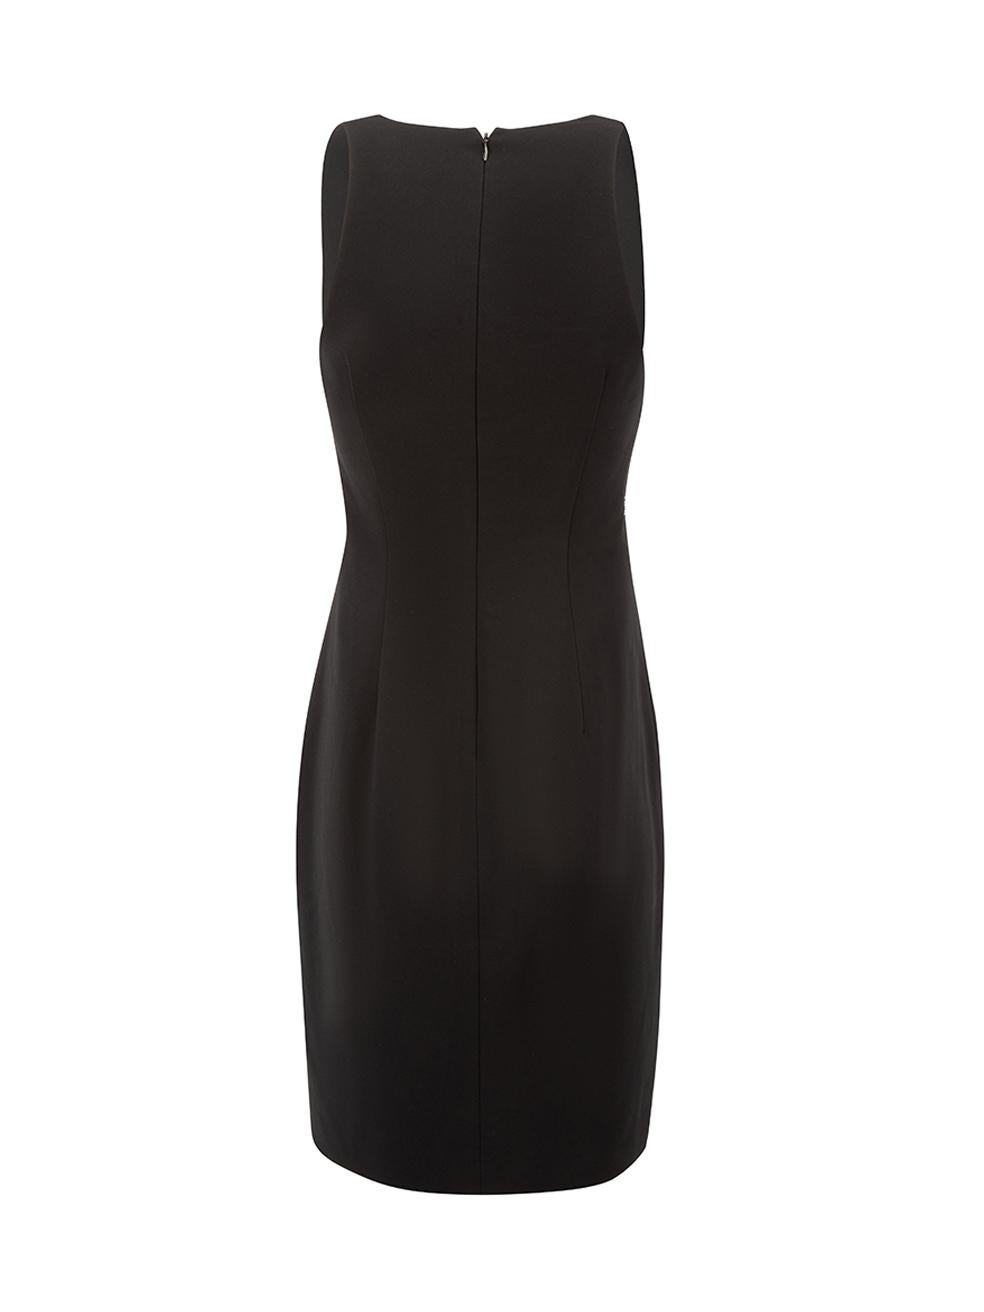 Alexander Wang Black Thread Detail Plunge Dress Size XS In Excellent Condition In London, GB